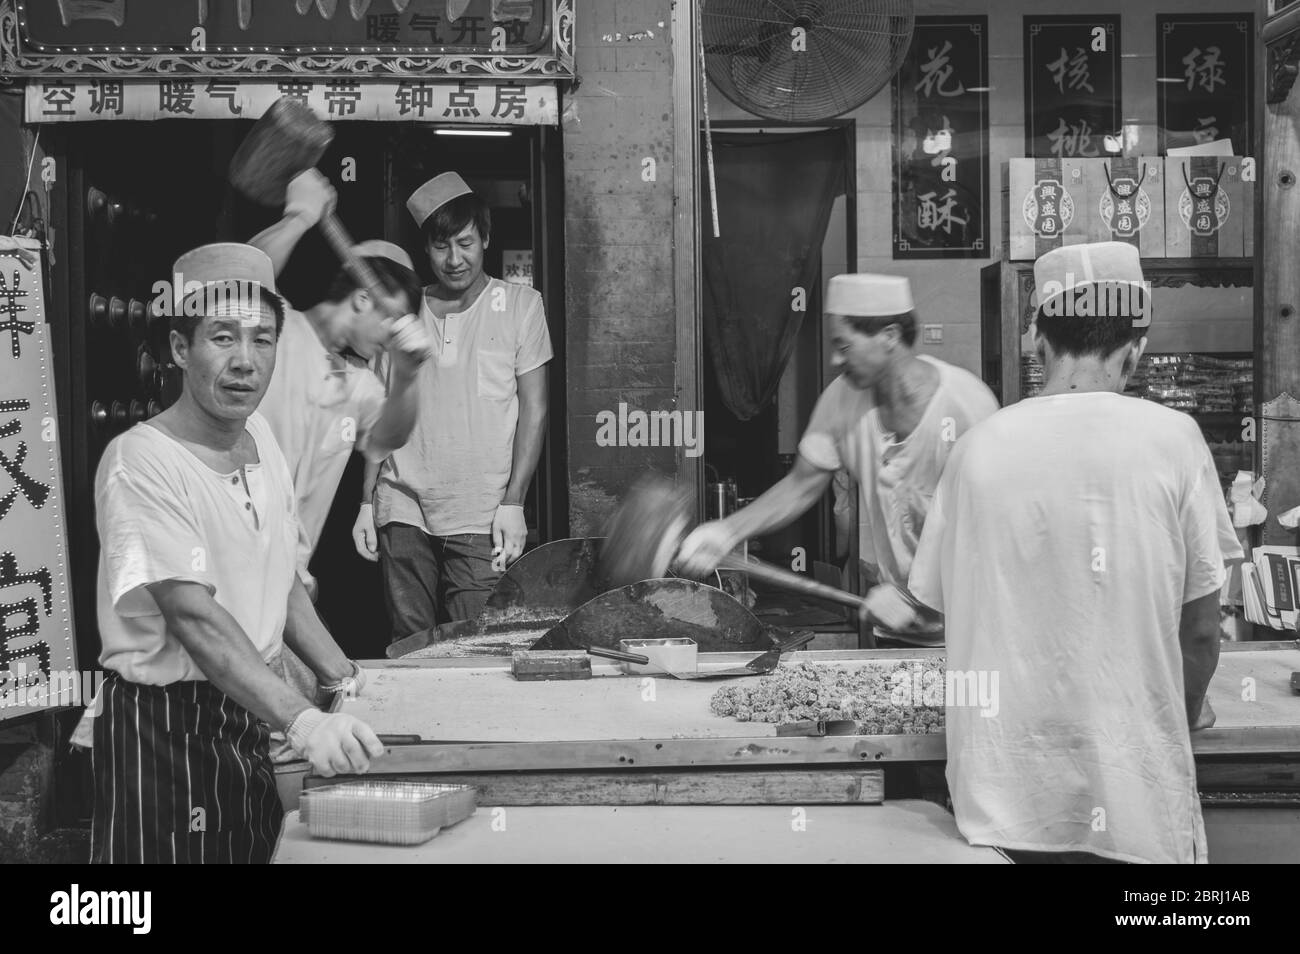 Xian / China - August 2, 2015: Chinese candy confectionery producers preparing local Xian sweets and candies, Huimin Street of Muslim Quarter in Xian, Stock Photo